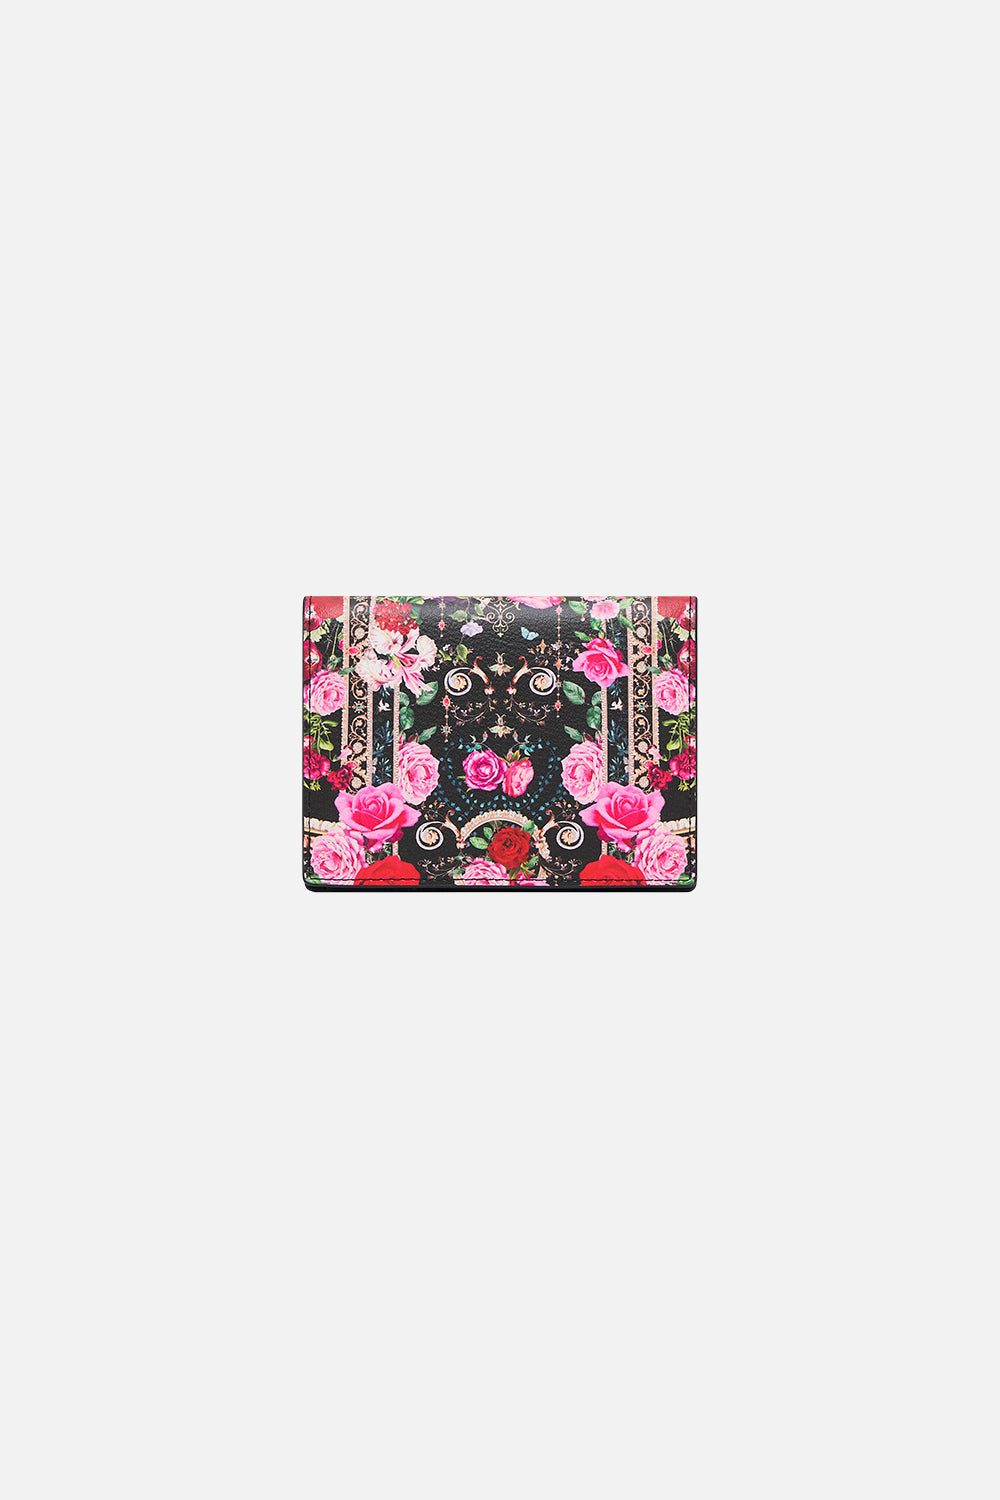 Product view of CAMILLA deisgner wallet in Reservation for Love print 